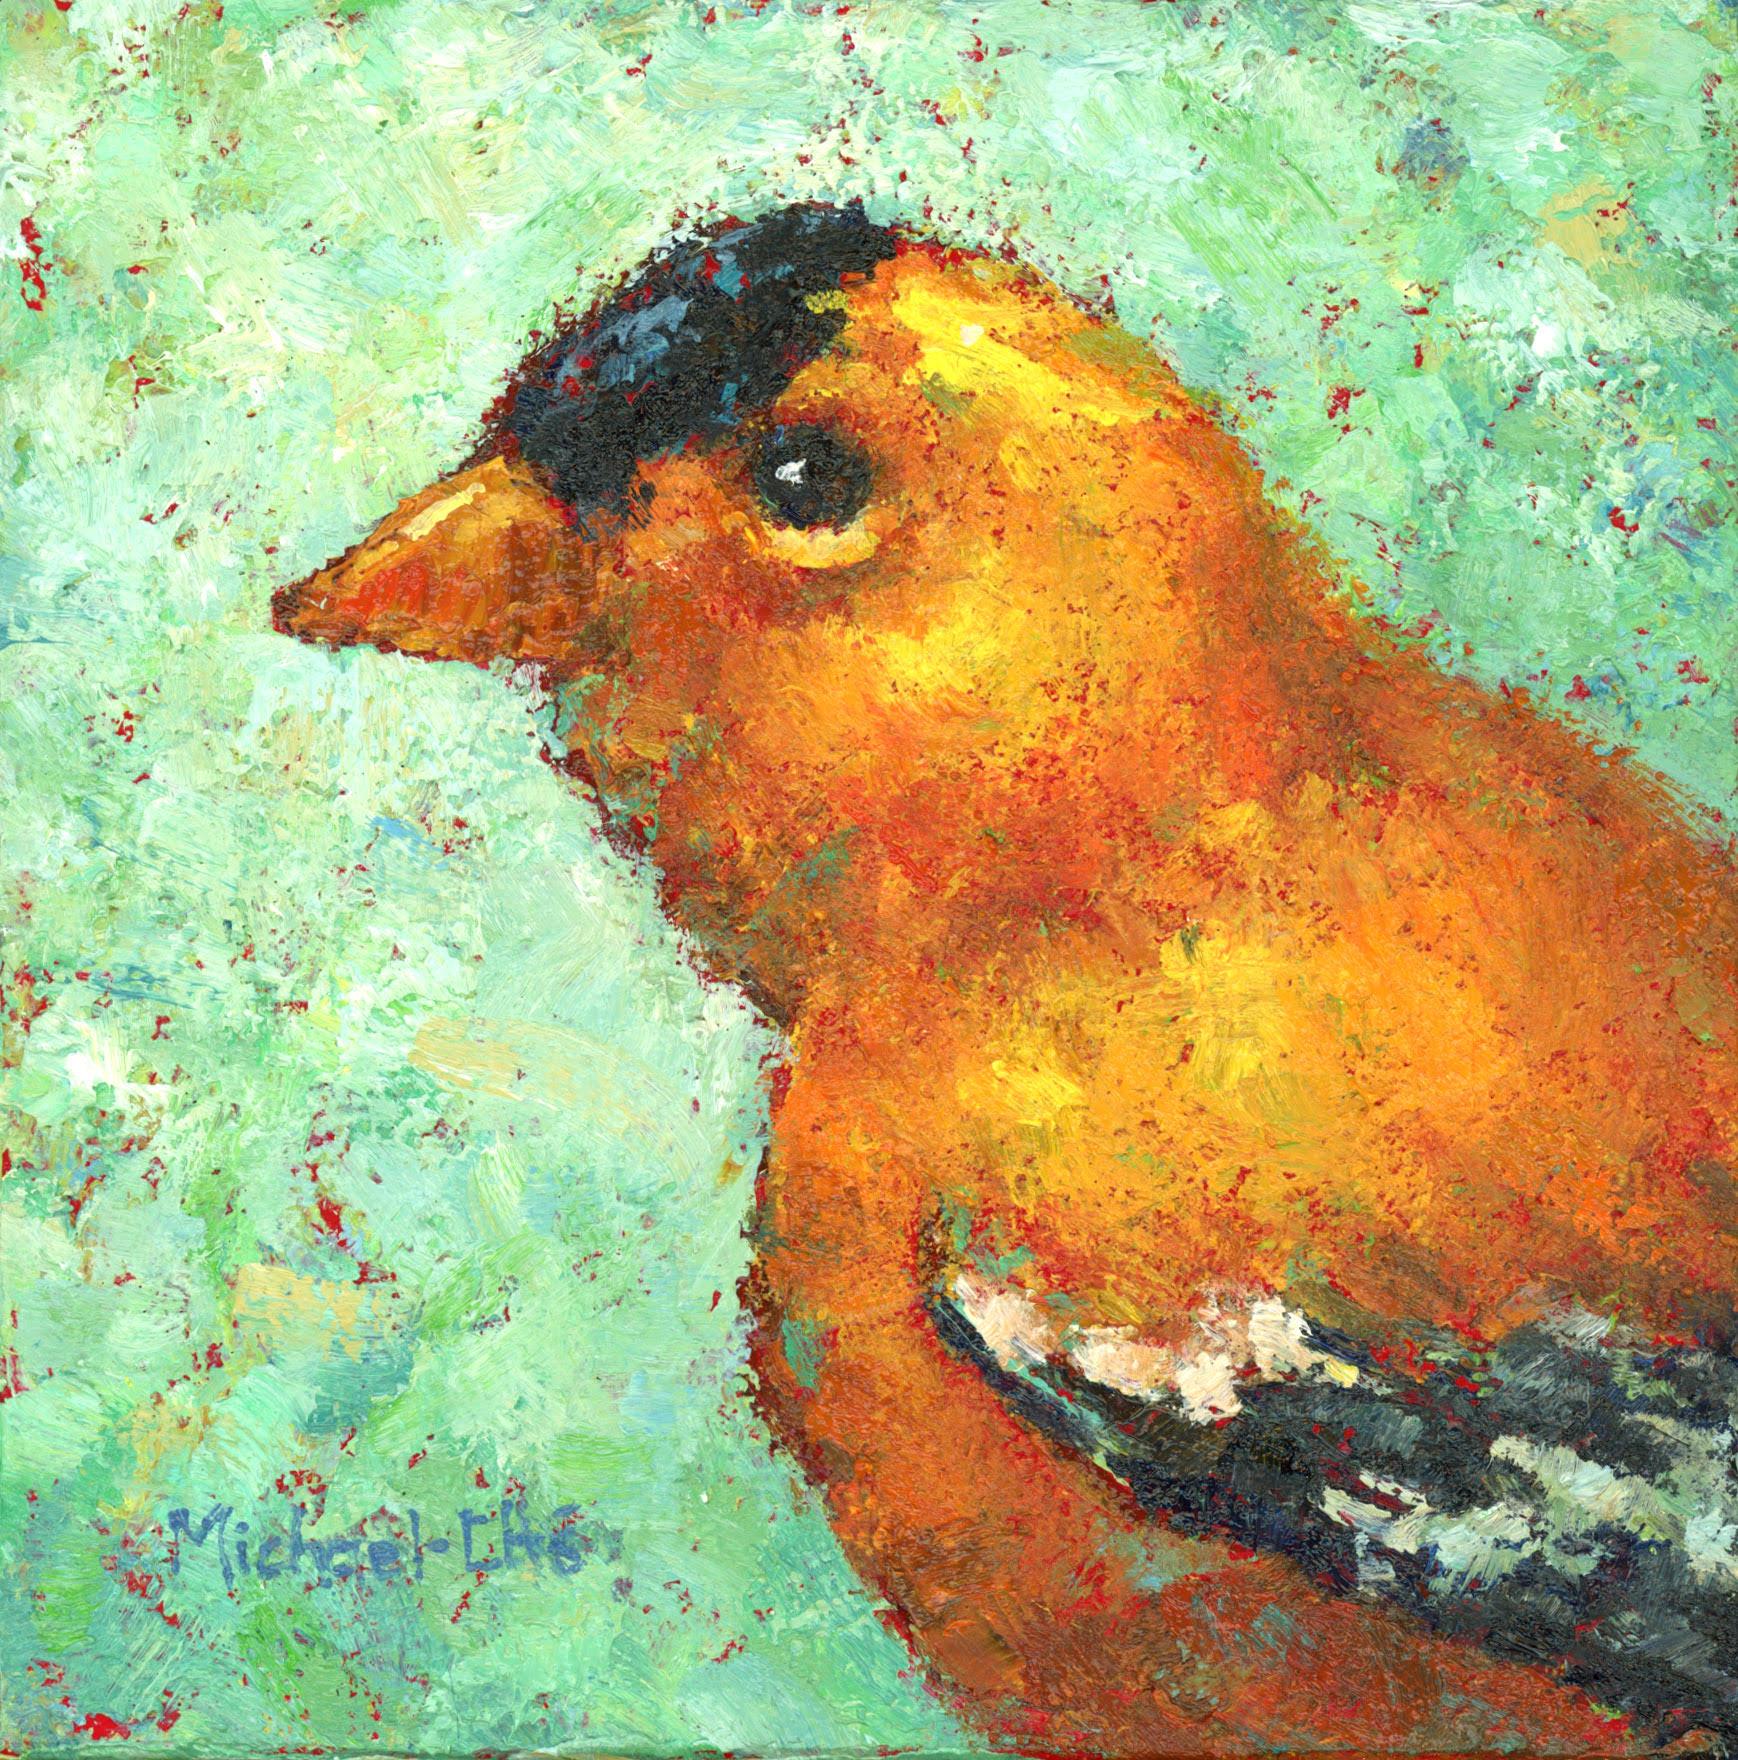 Michael-Che Swisher Animal Painting - "The Gold Got It" Impasto oil painting of a yellow bird on green background